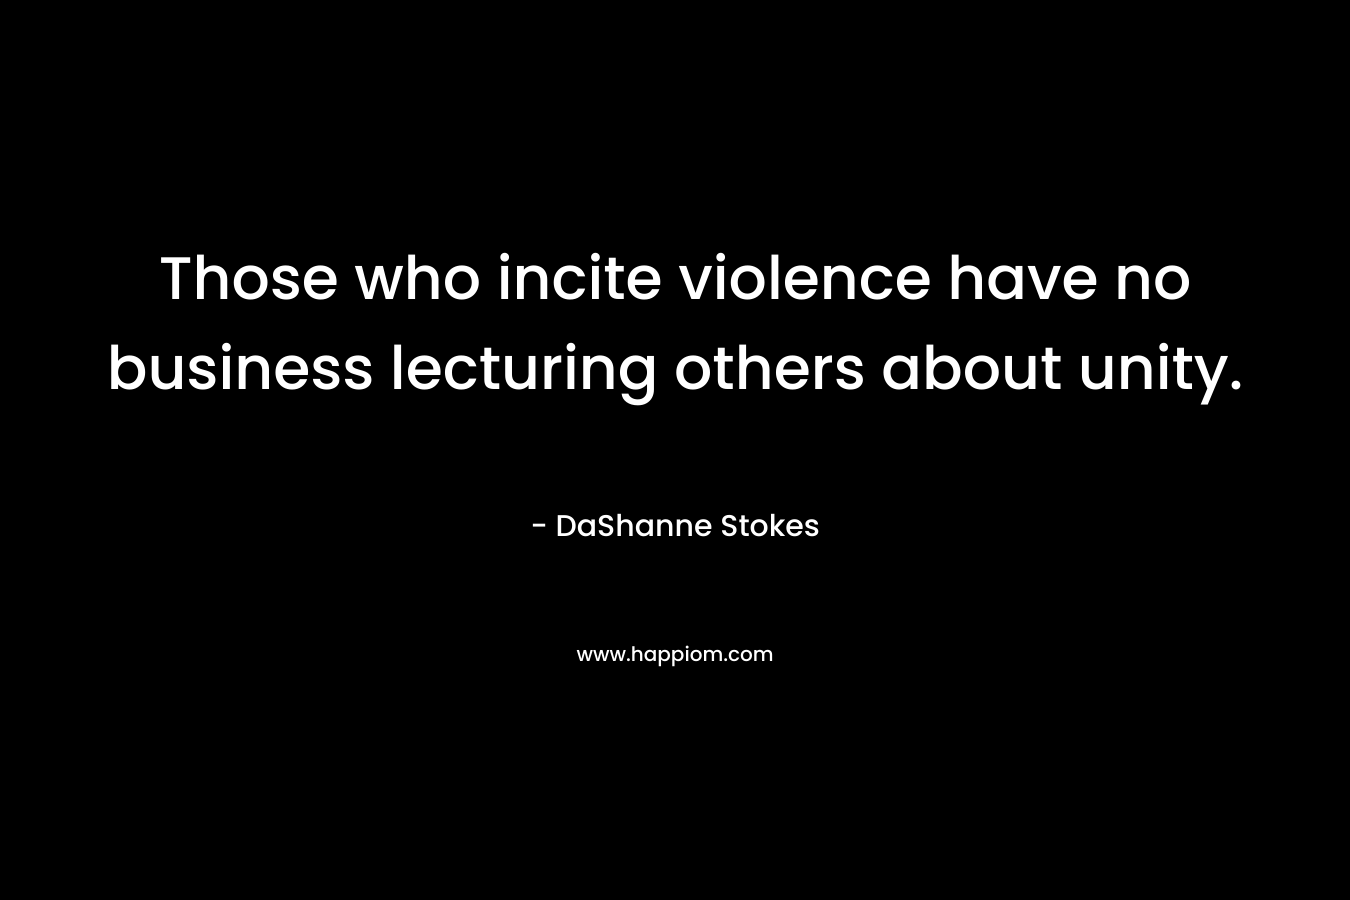 Those who incite violence have no business lecturing others about unity. – DaShanne Stokes